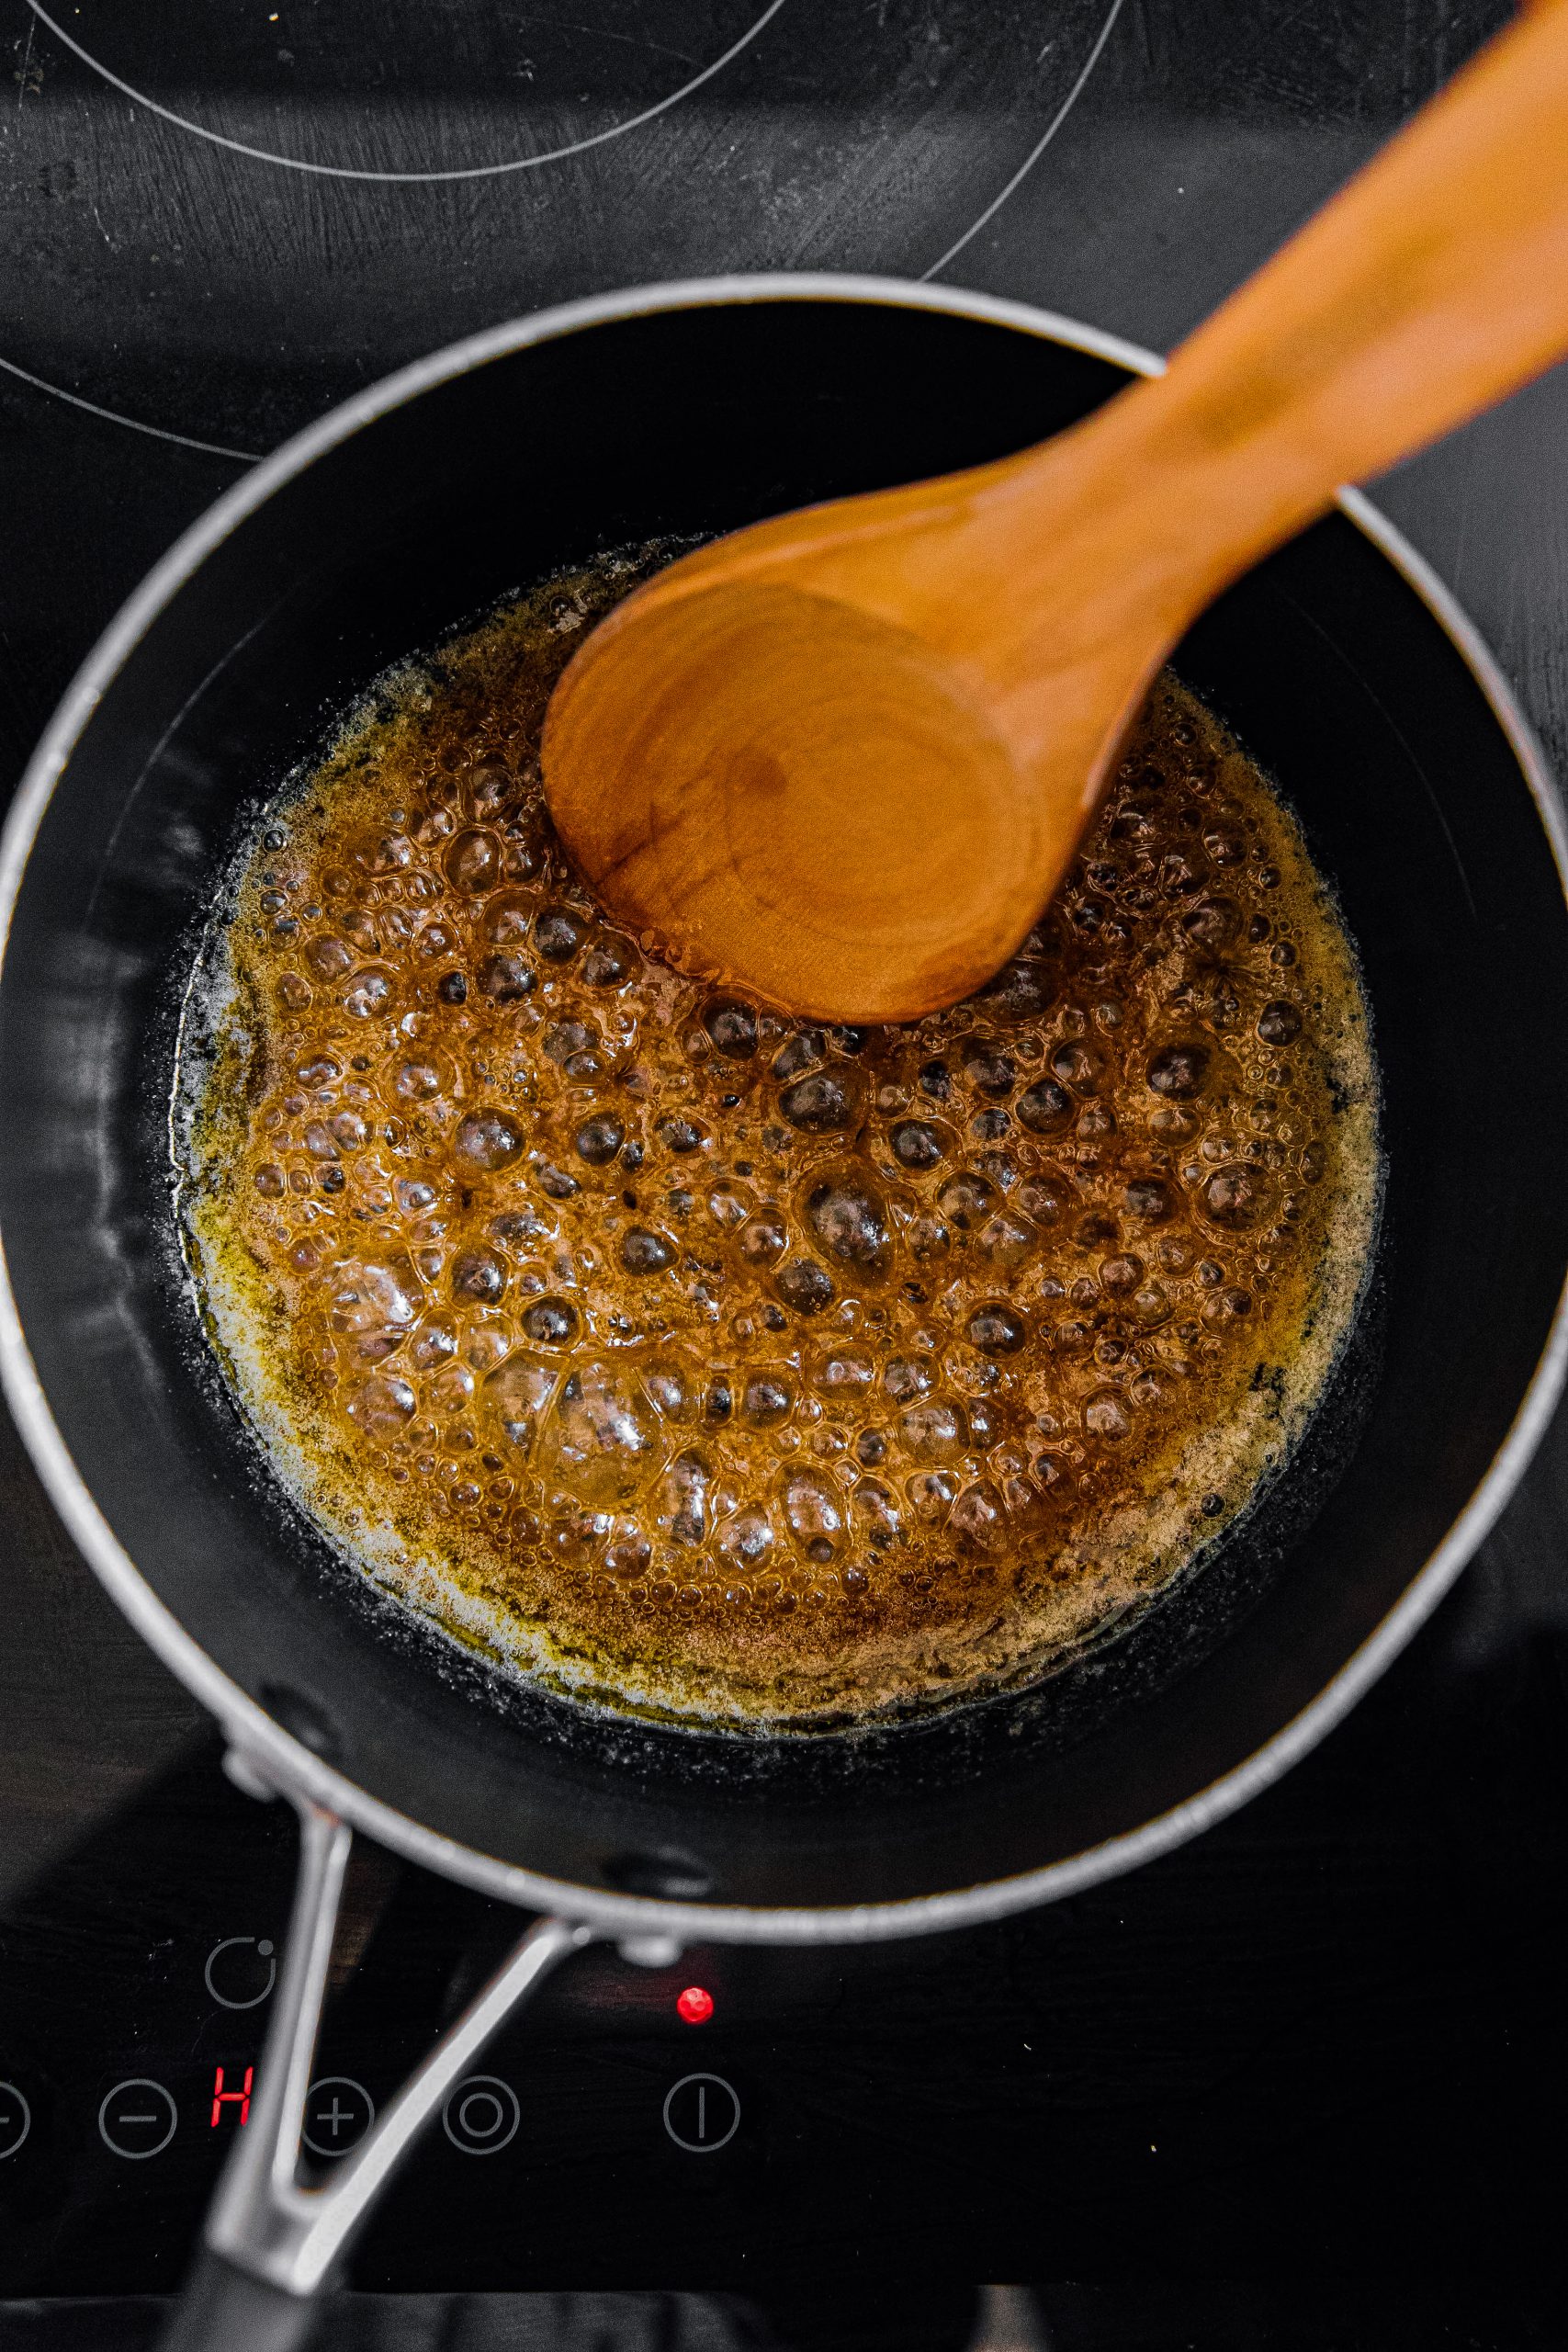 In a large saucepan over medium-high heat, combine brown sugar, light corn syrup, and butter.